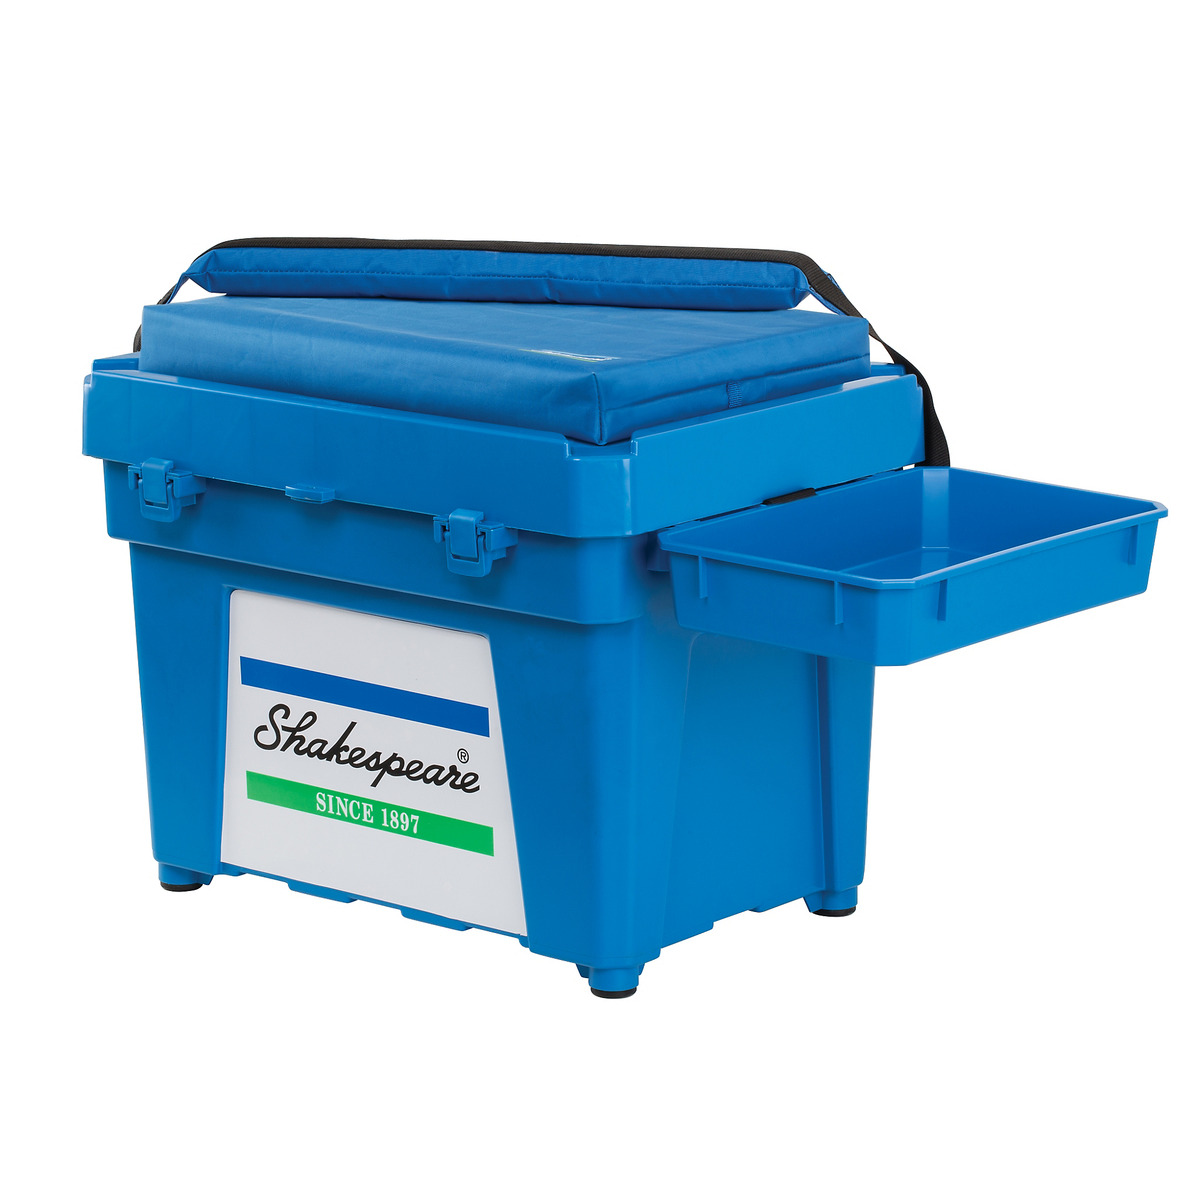 Shakespeare Seatbox Package - Blue